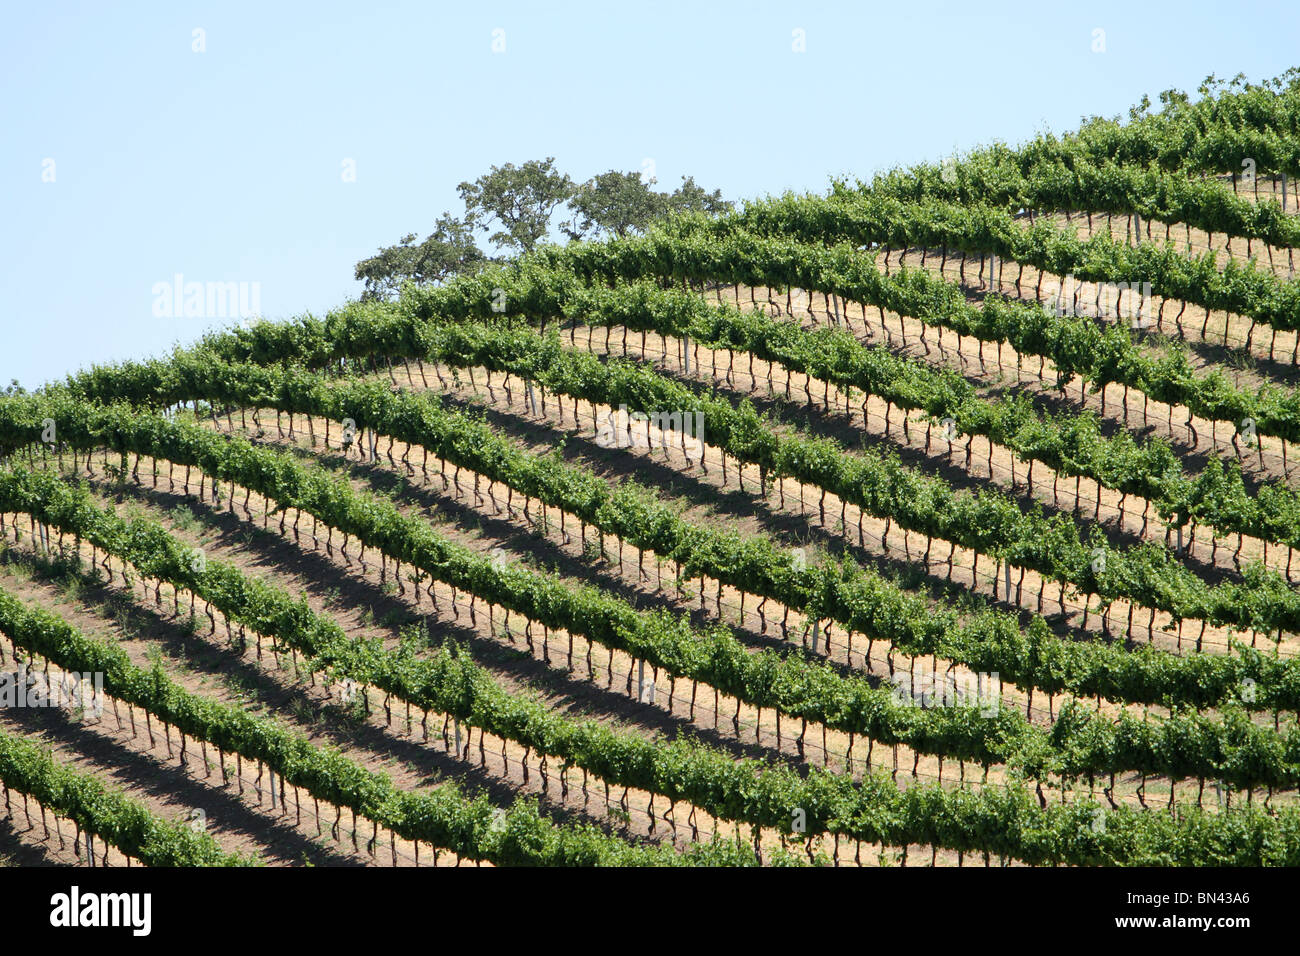 Views Of The Paso Robles Wine Region Stock Photo